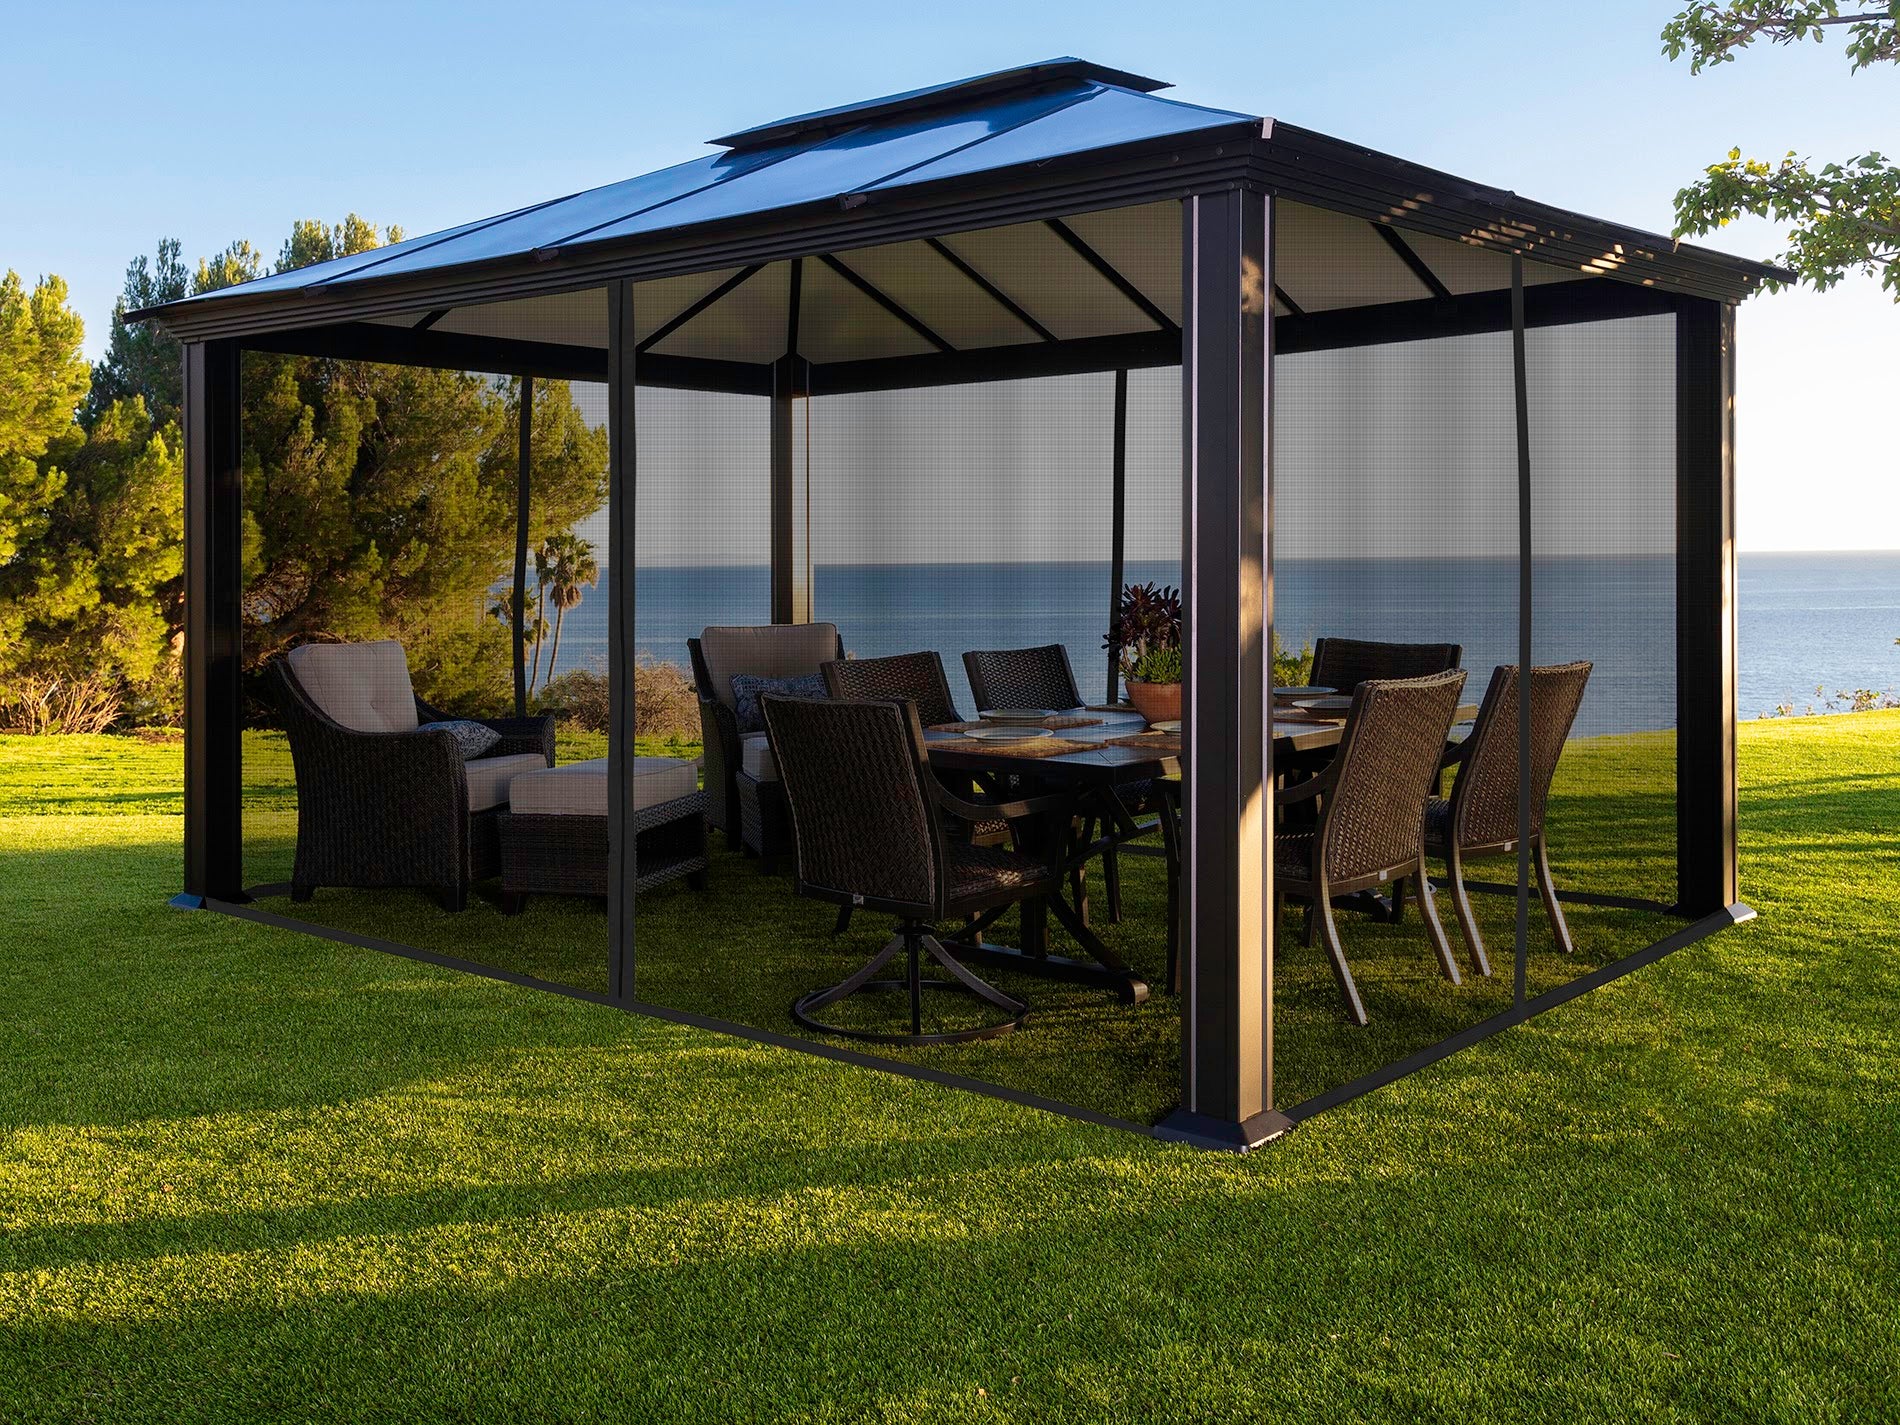 Santa Monica Hard Top Gazebo with Mosquito Netting accessory from side angle